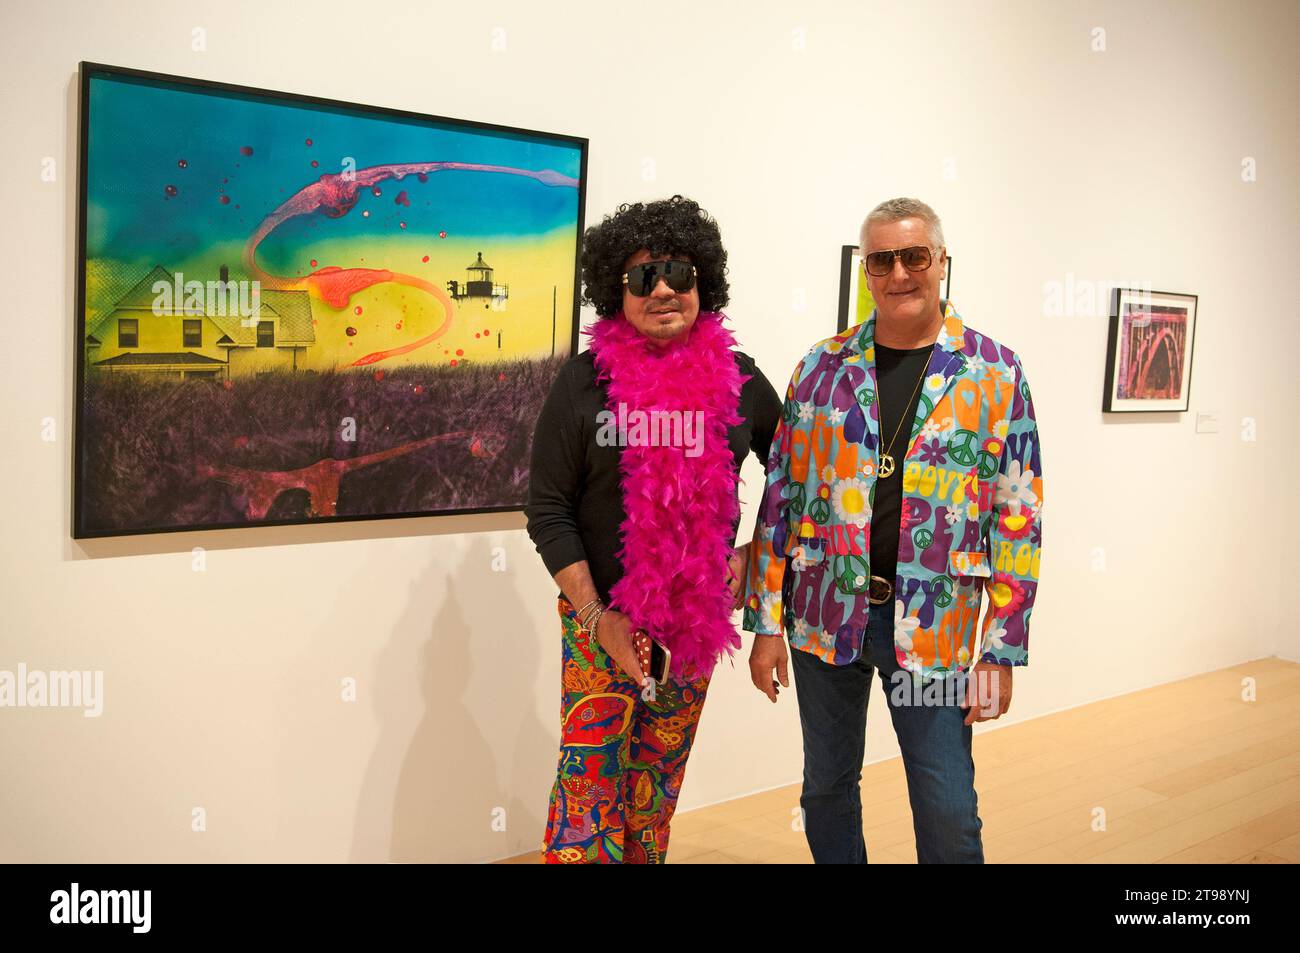 People dressed in retro 1960s style for the opening of Kali, Artographer, exhibition, Palm Springs, art, museum, California, USA Stock Photo